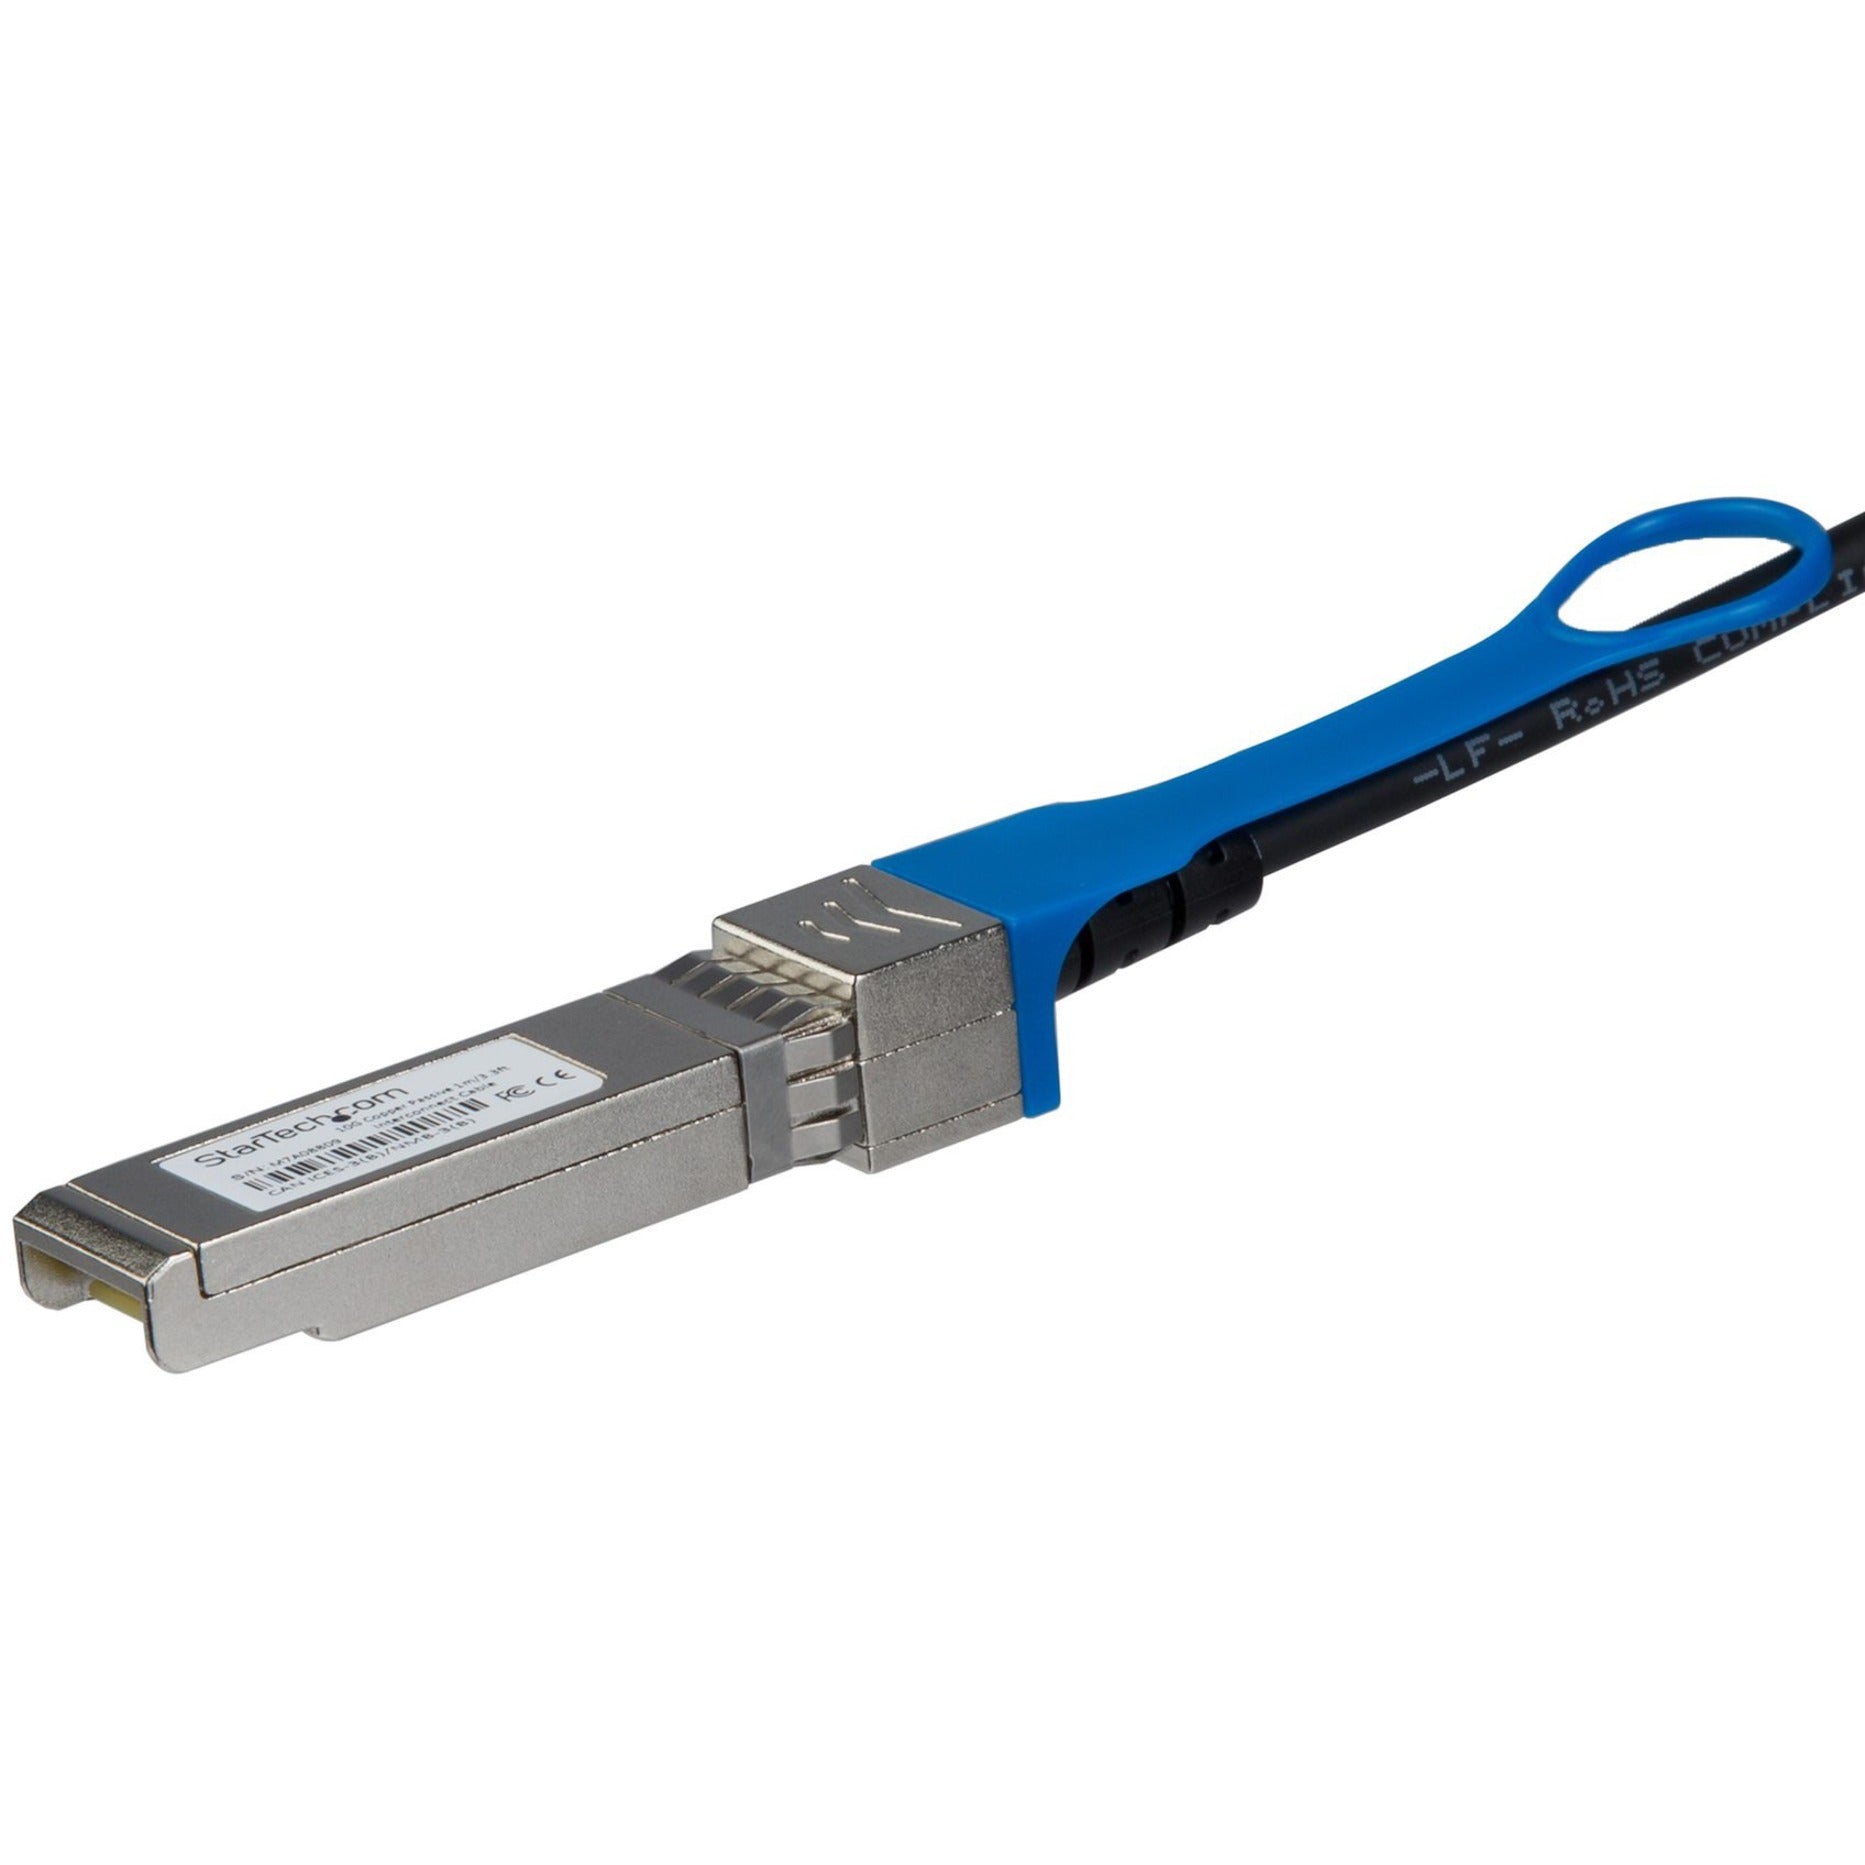 StarTech.com JD096CST Twinaxial Network Cable, 10 Gbit/s, 3.94 ft, SFP+ Male to SFP+ Male